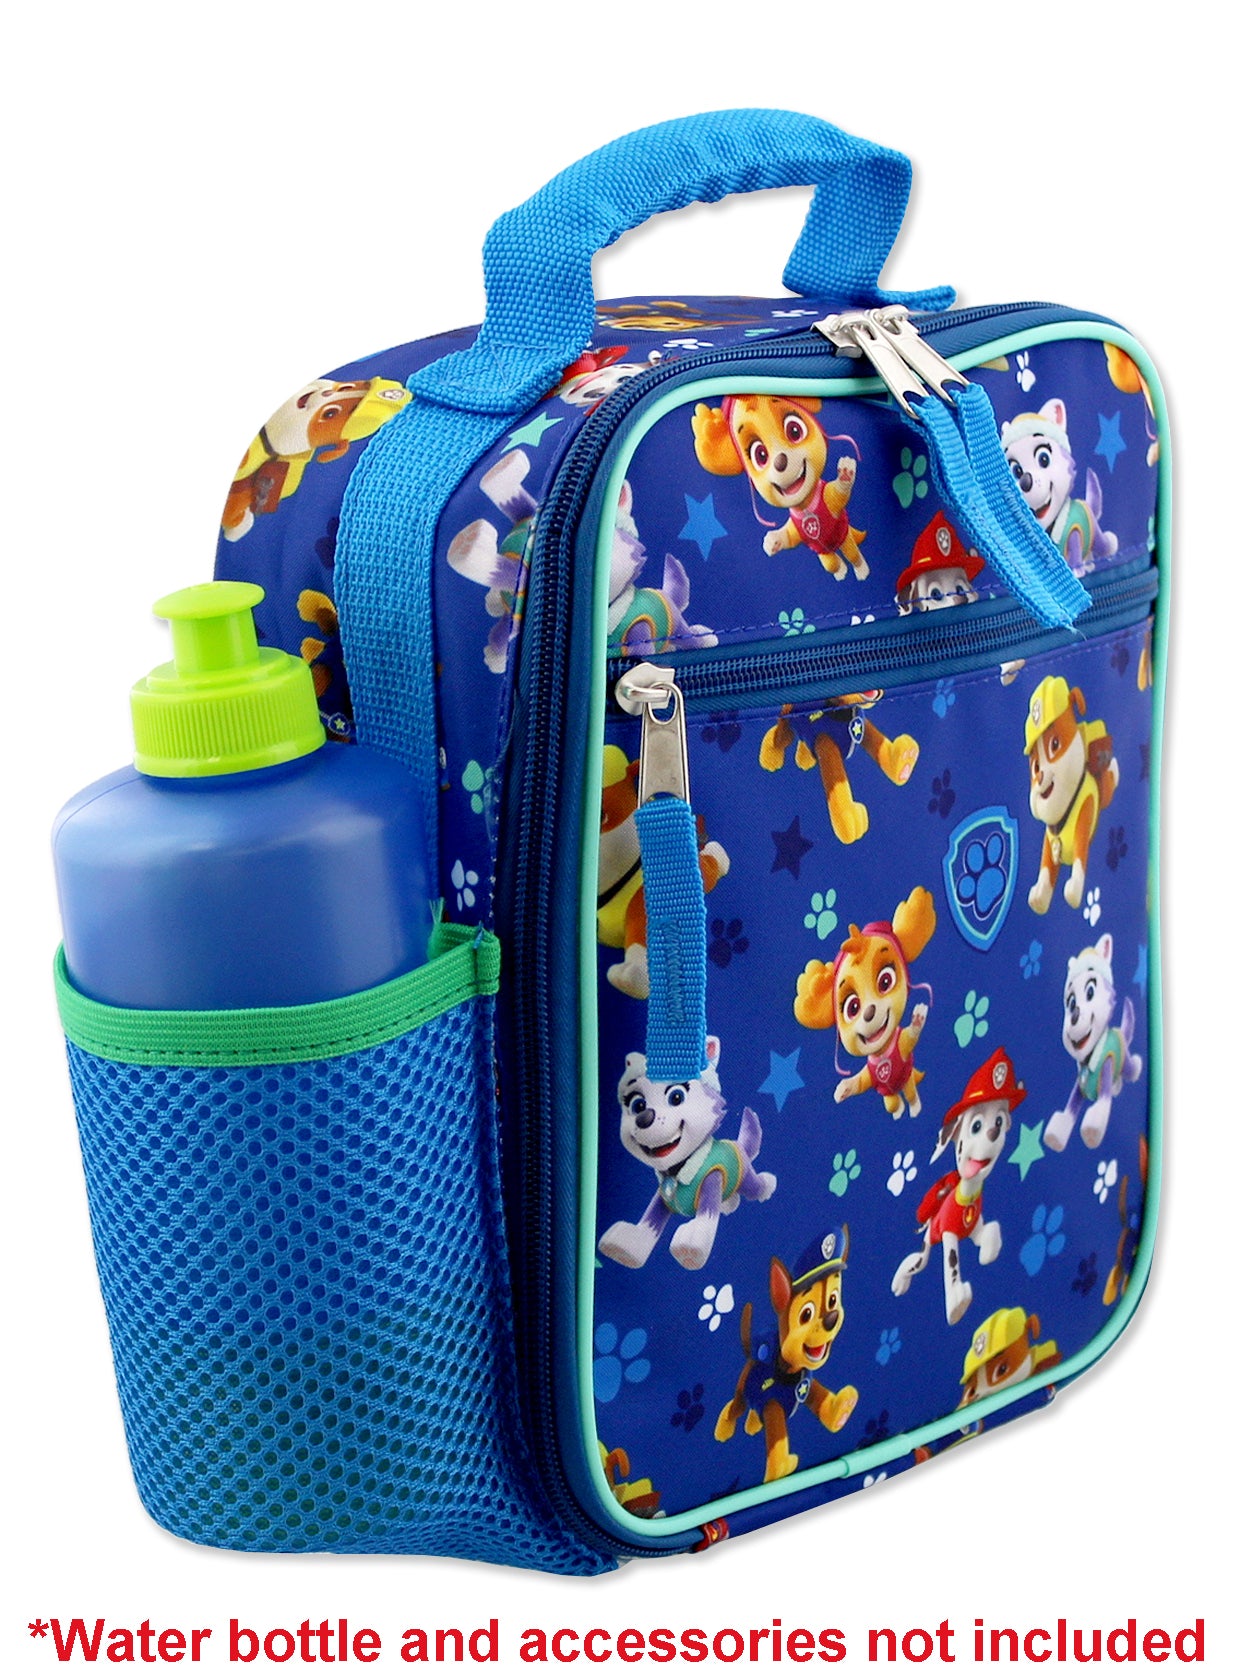 Paw Patrol Lunch Box Characters And Vehicles Lunch Bag Tote Blue